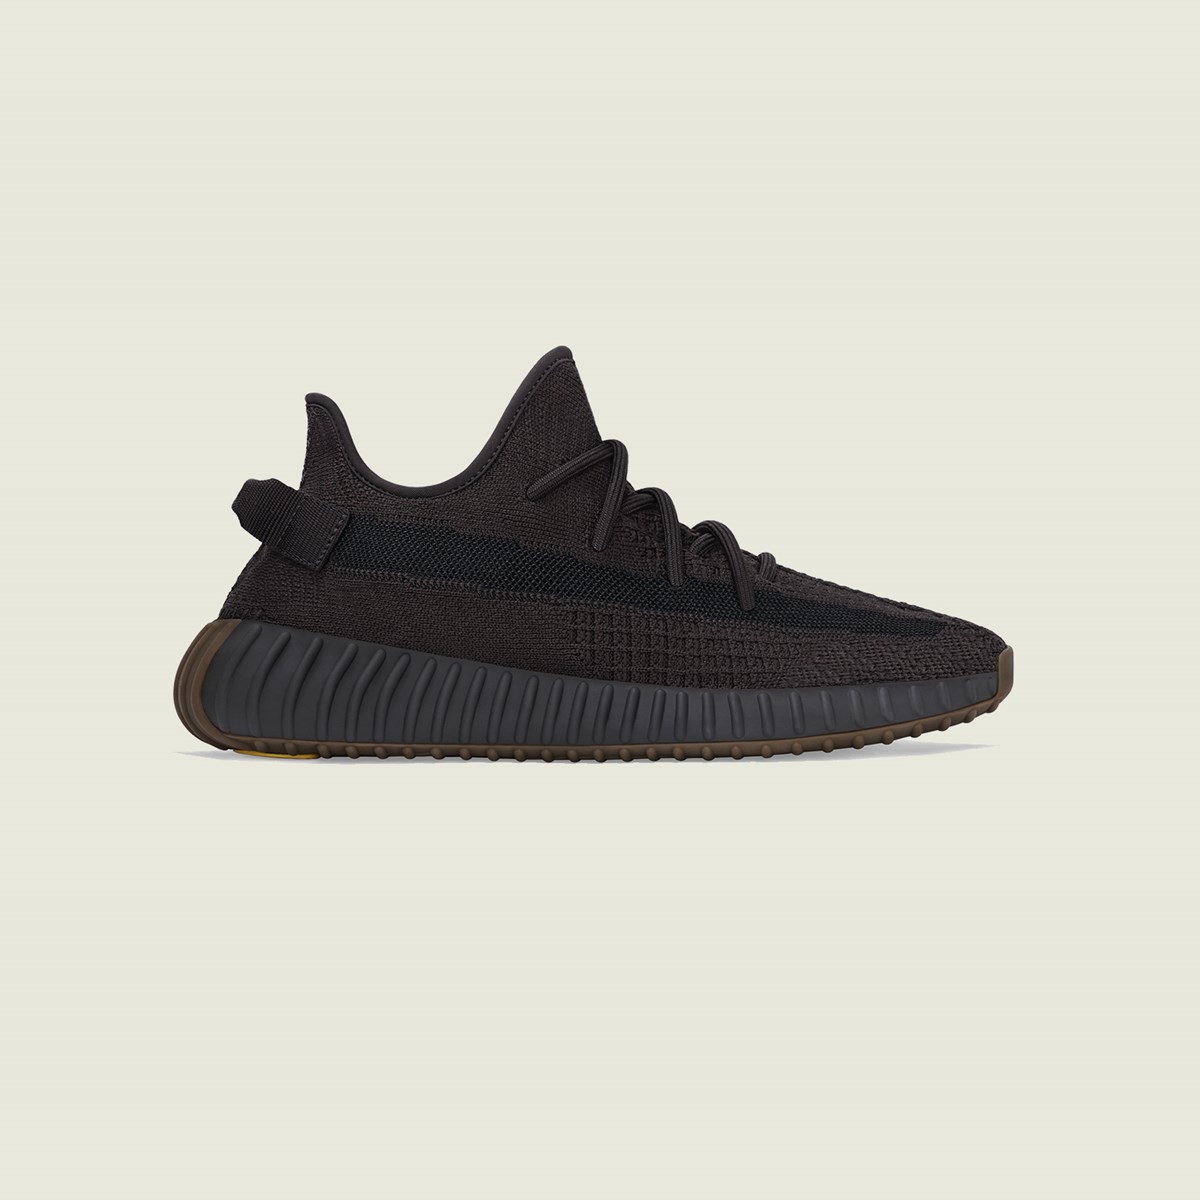 Yeezy Boost 350 V2 FY2903